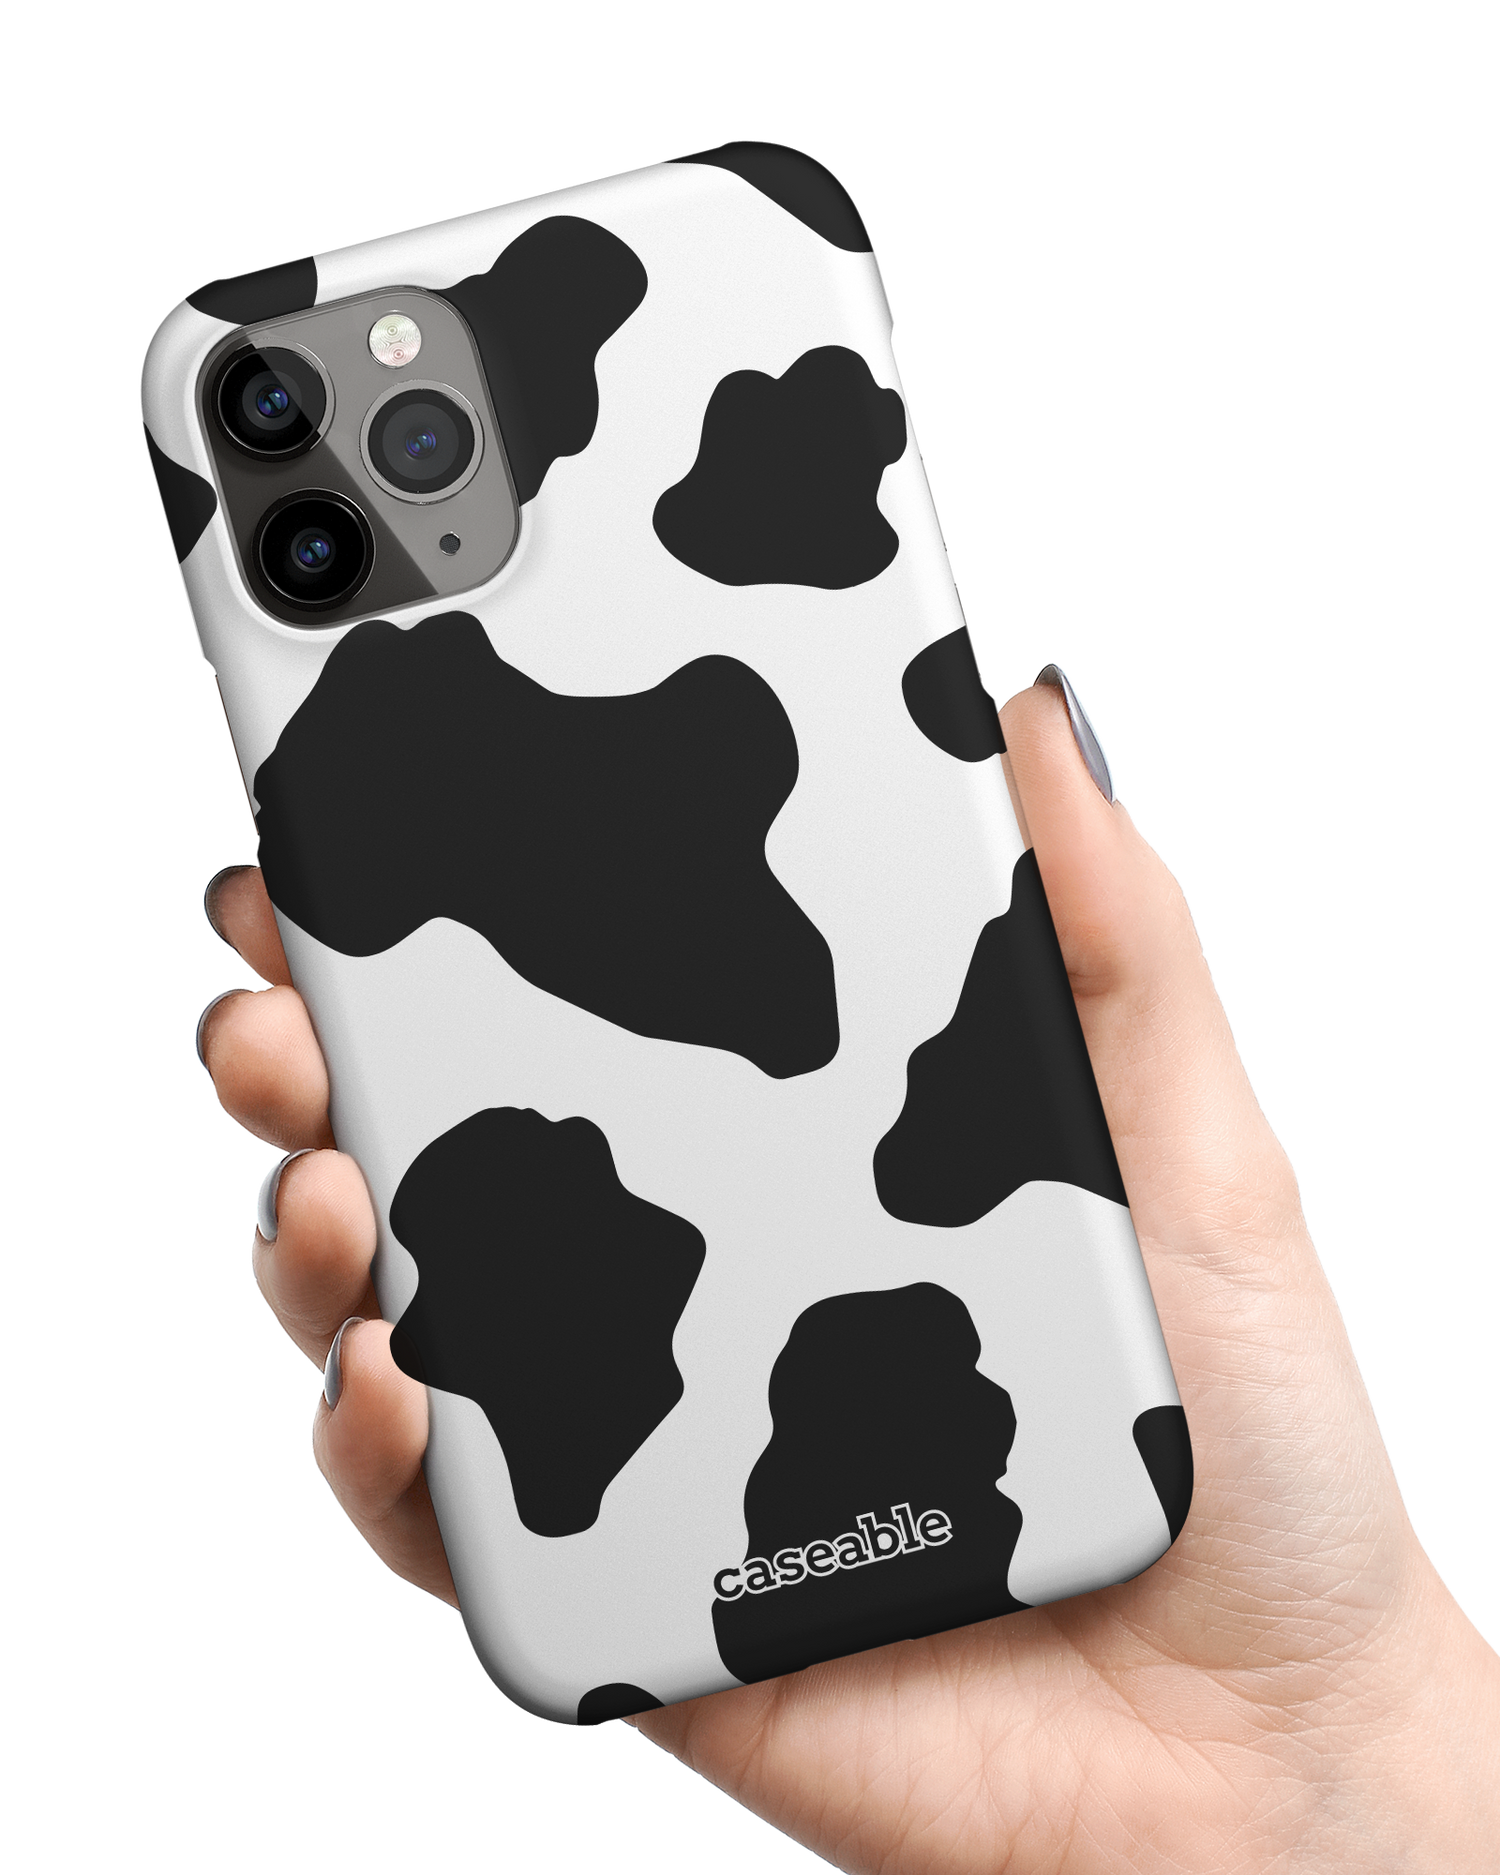 Cow Print 2 Hard Shell Phone Case Apple iPhone 11 Pro Max held in hand